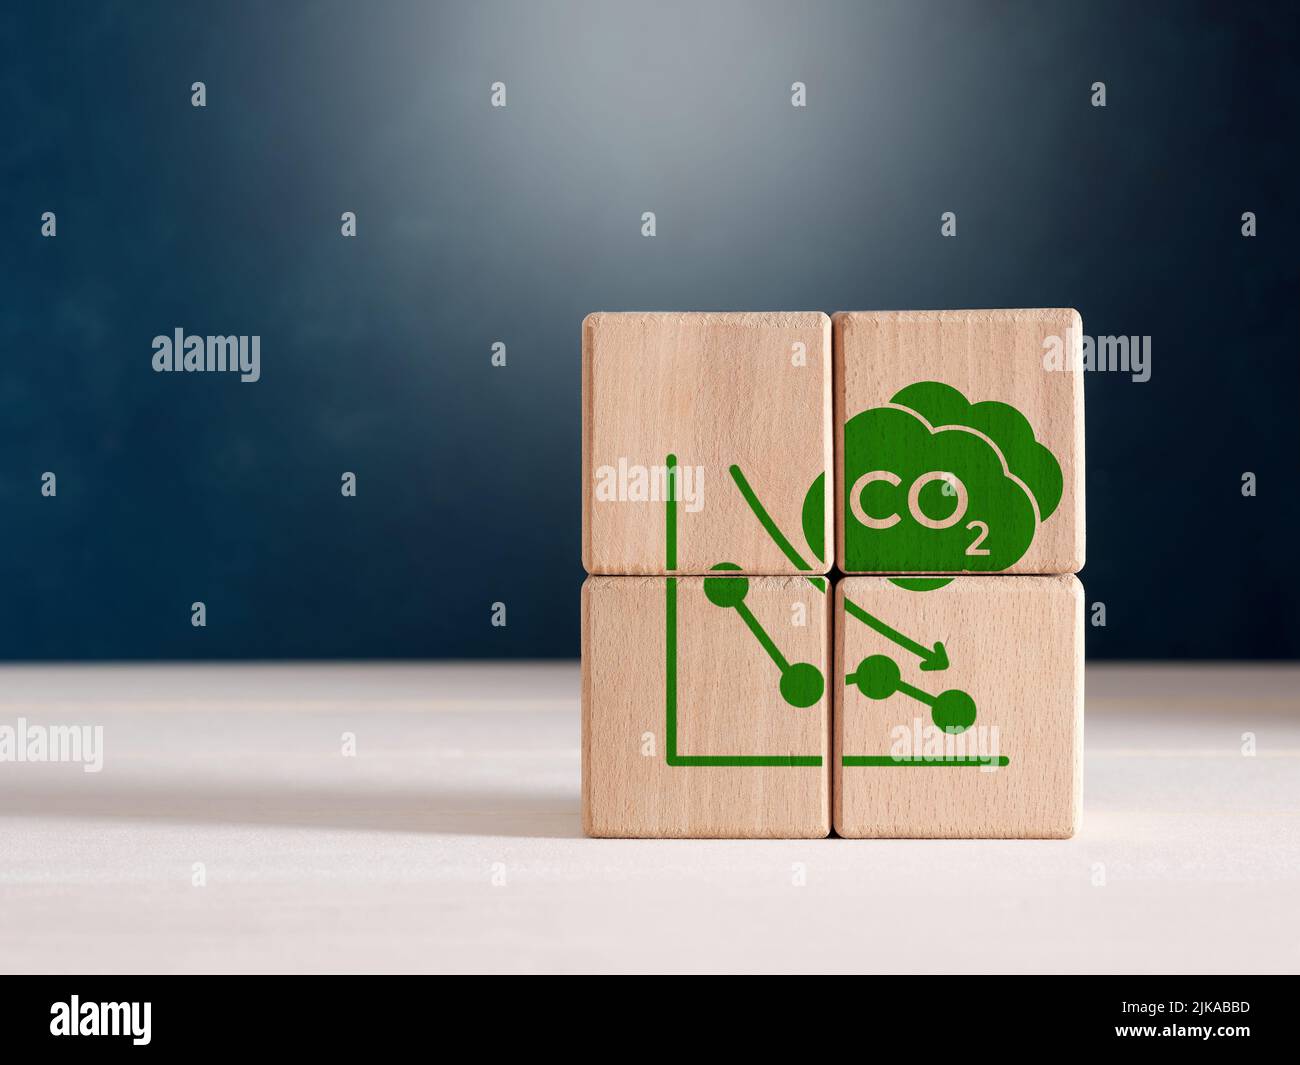 CO2 carbon emission reduction icon on wooden cubes. Net zero emission, carbon neutral environment, renewable energy, sustainable technology and ecolog Stock Photo